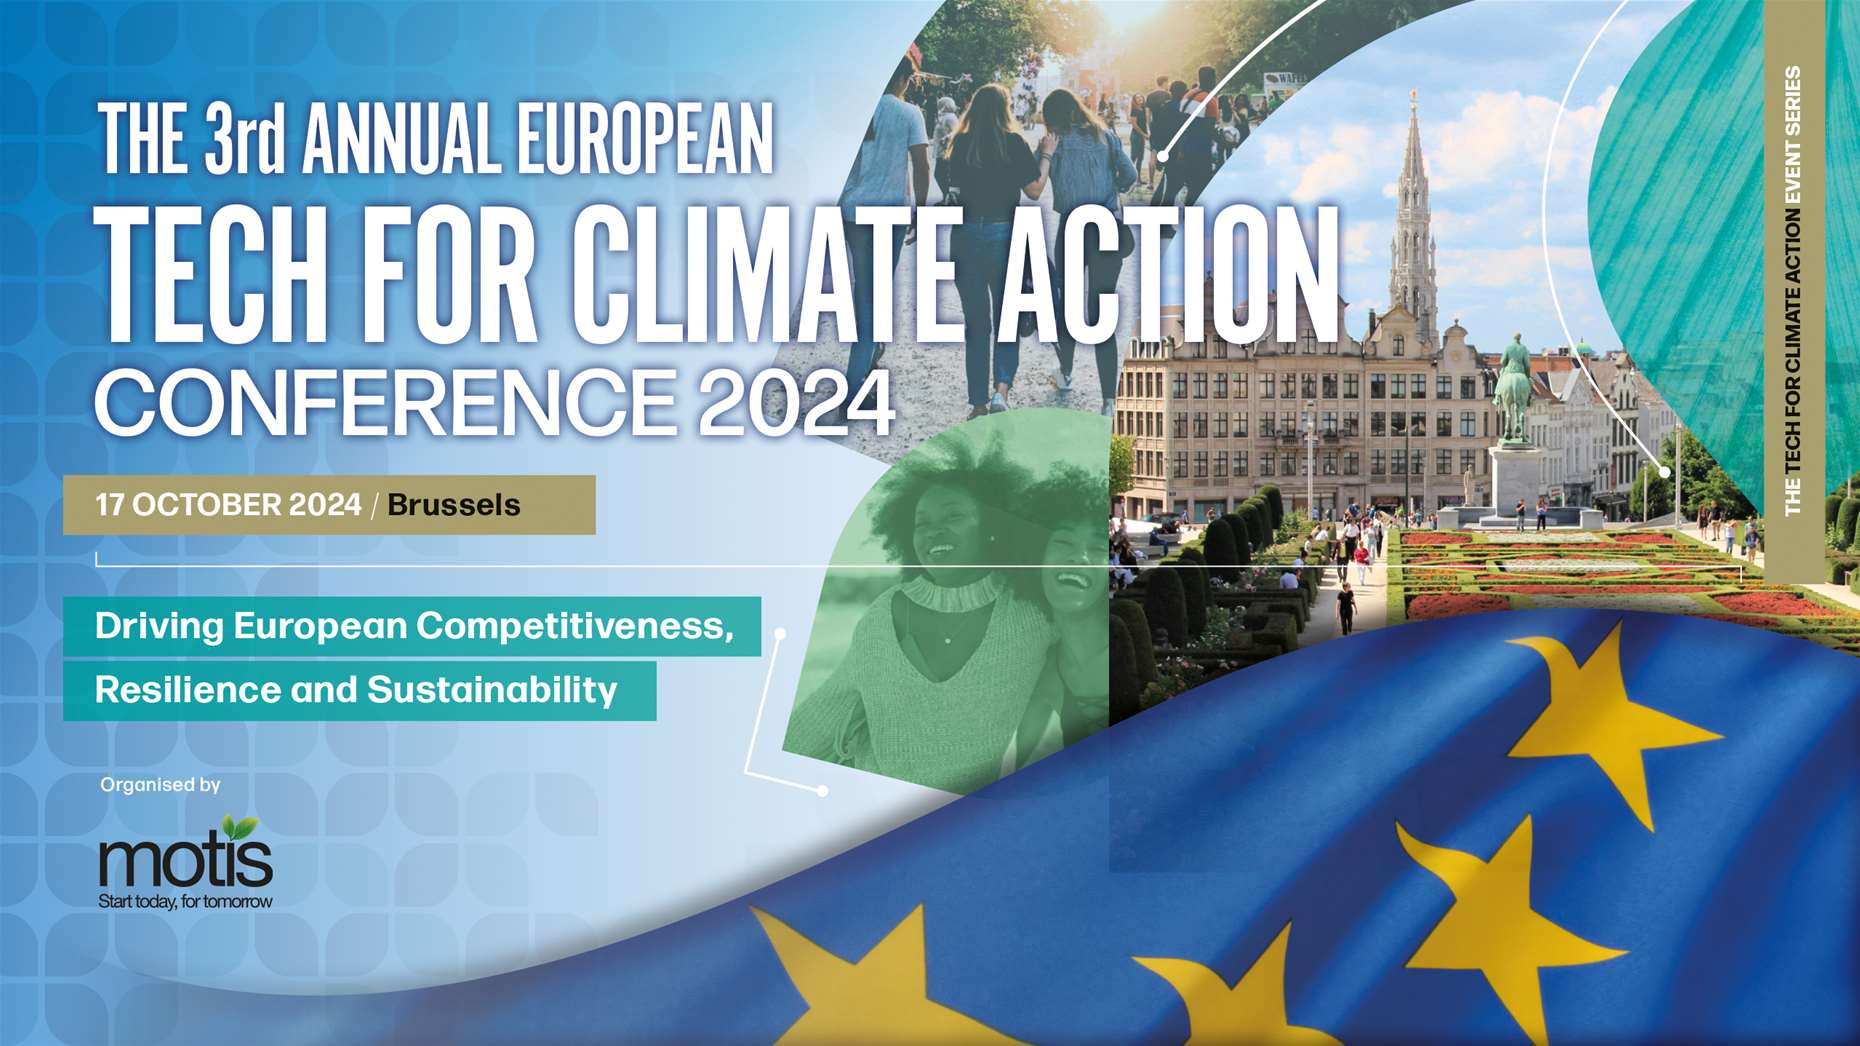 The 3rd Annual European Tech for Climate Action Conference 